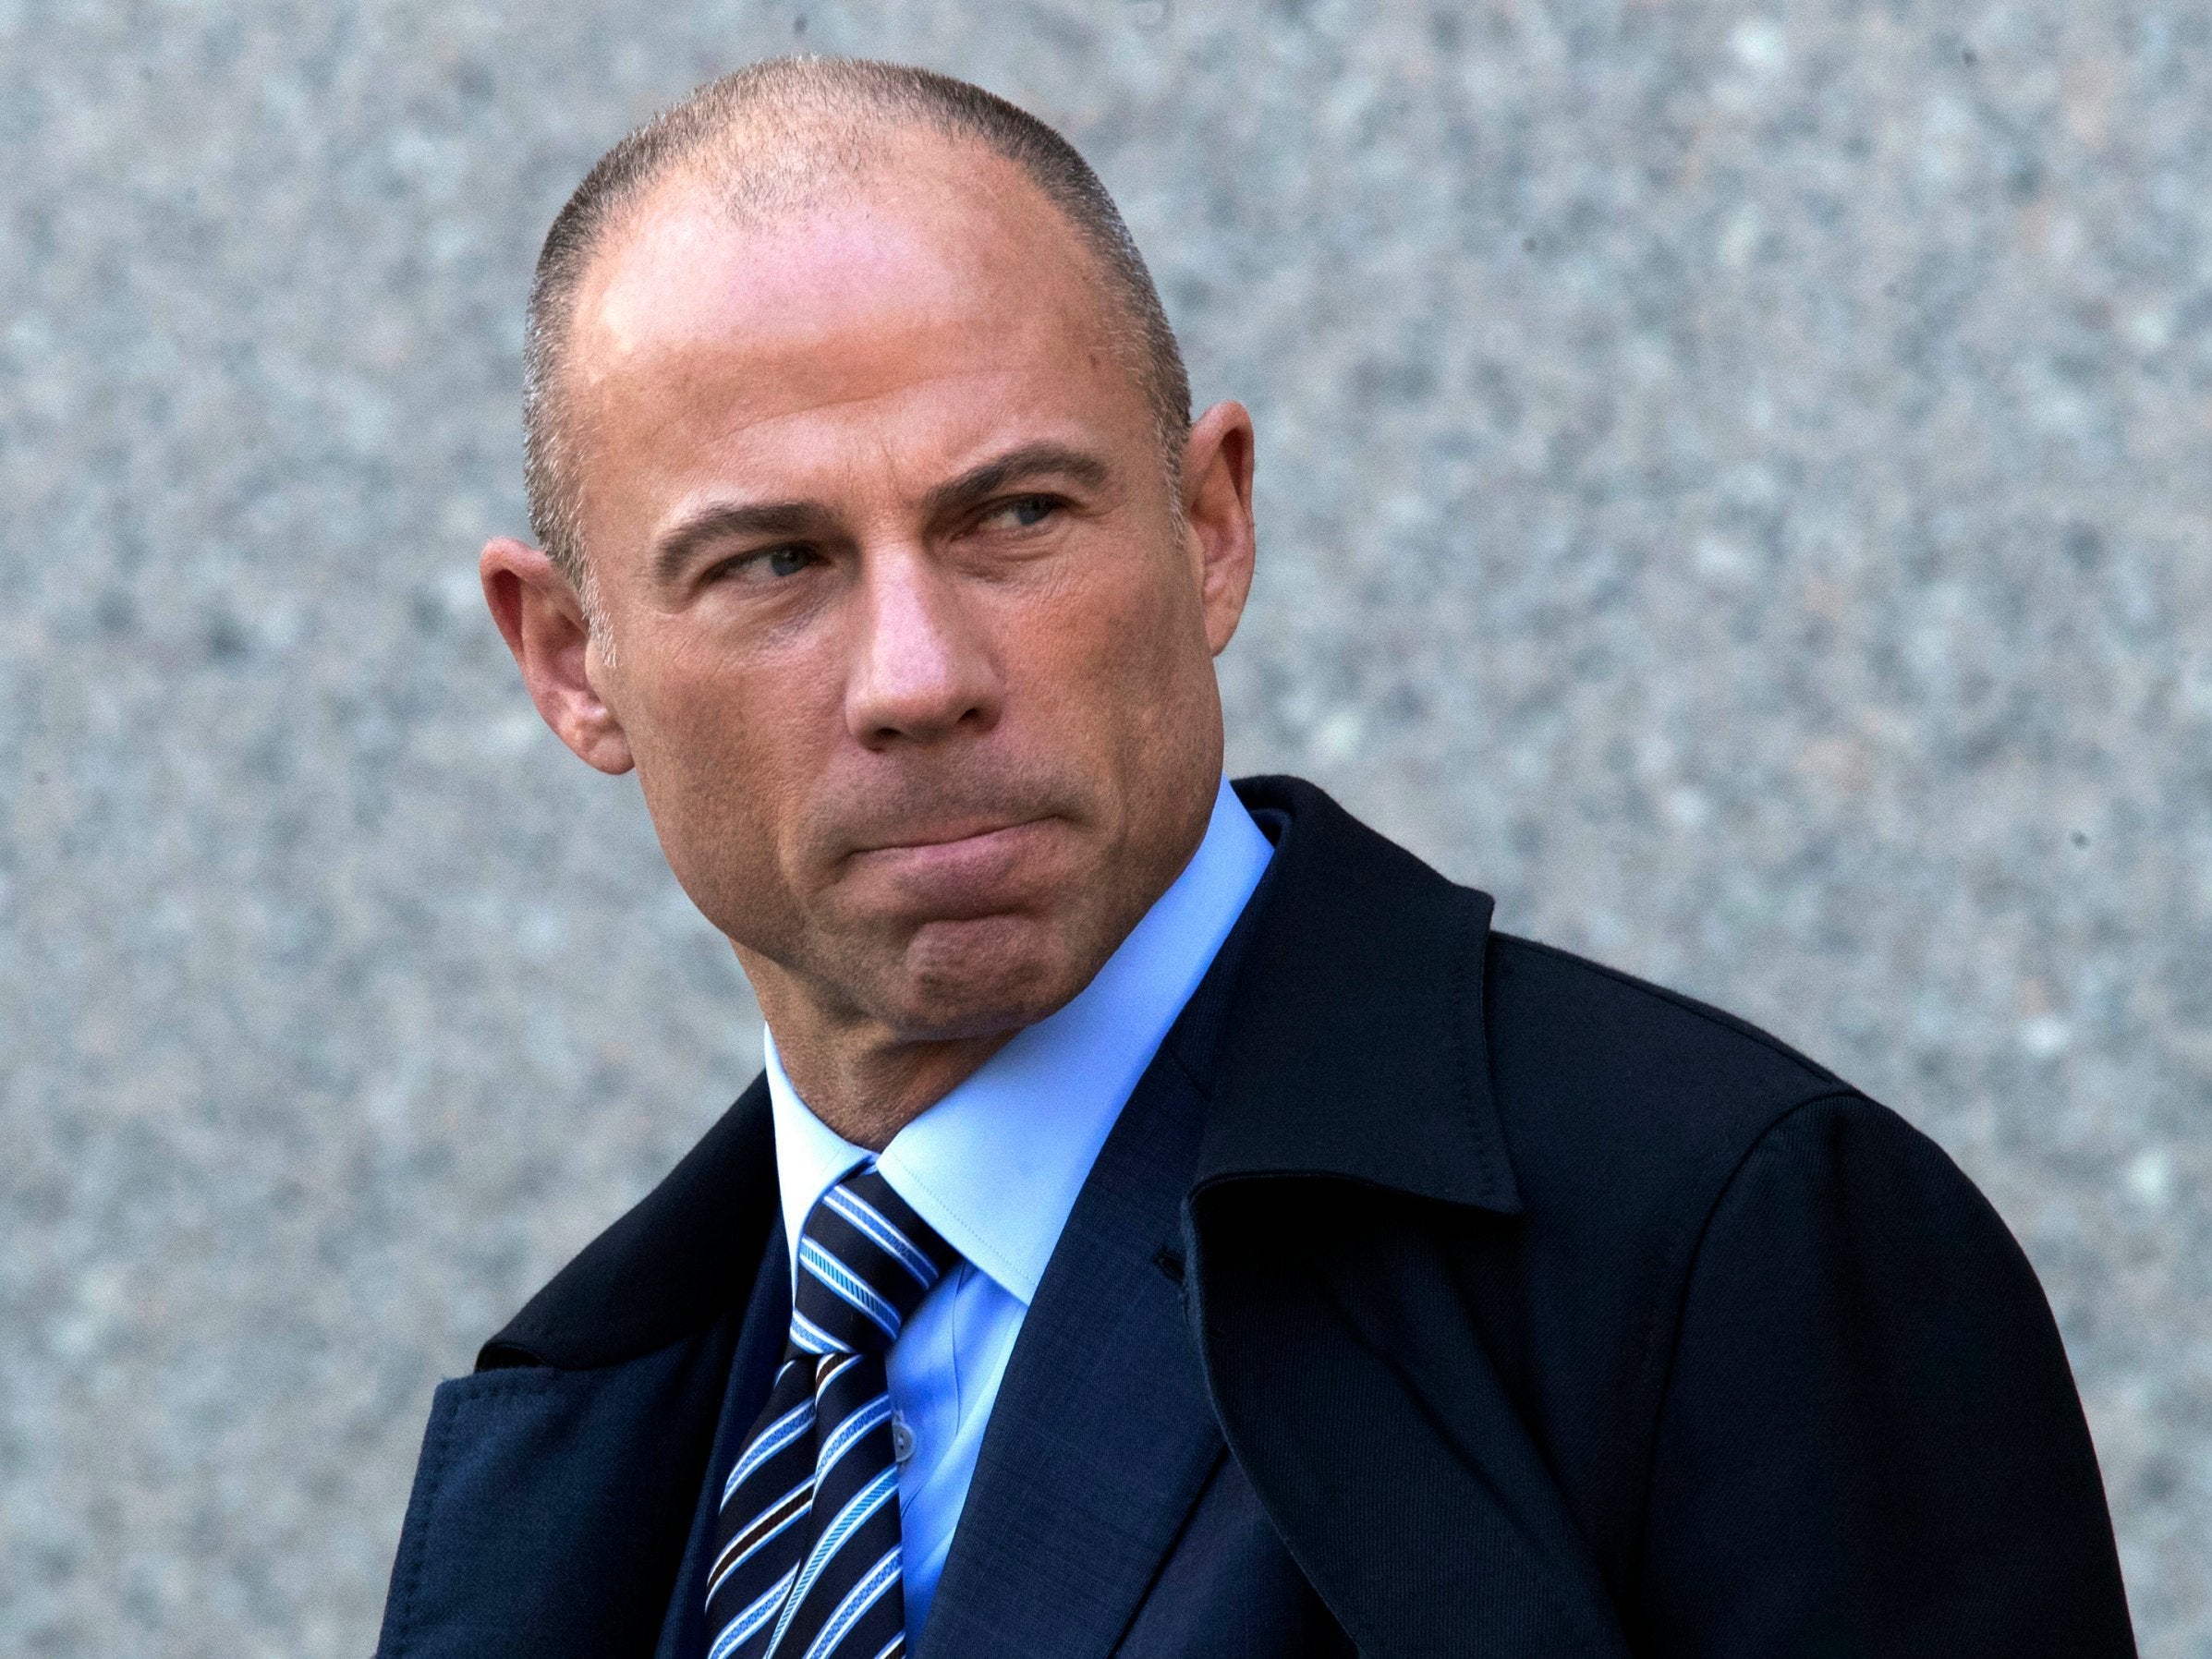 Stormy Daniels' lawyer says he now represents three other women against Donald Trump ...2394 x 1796